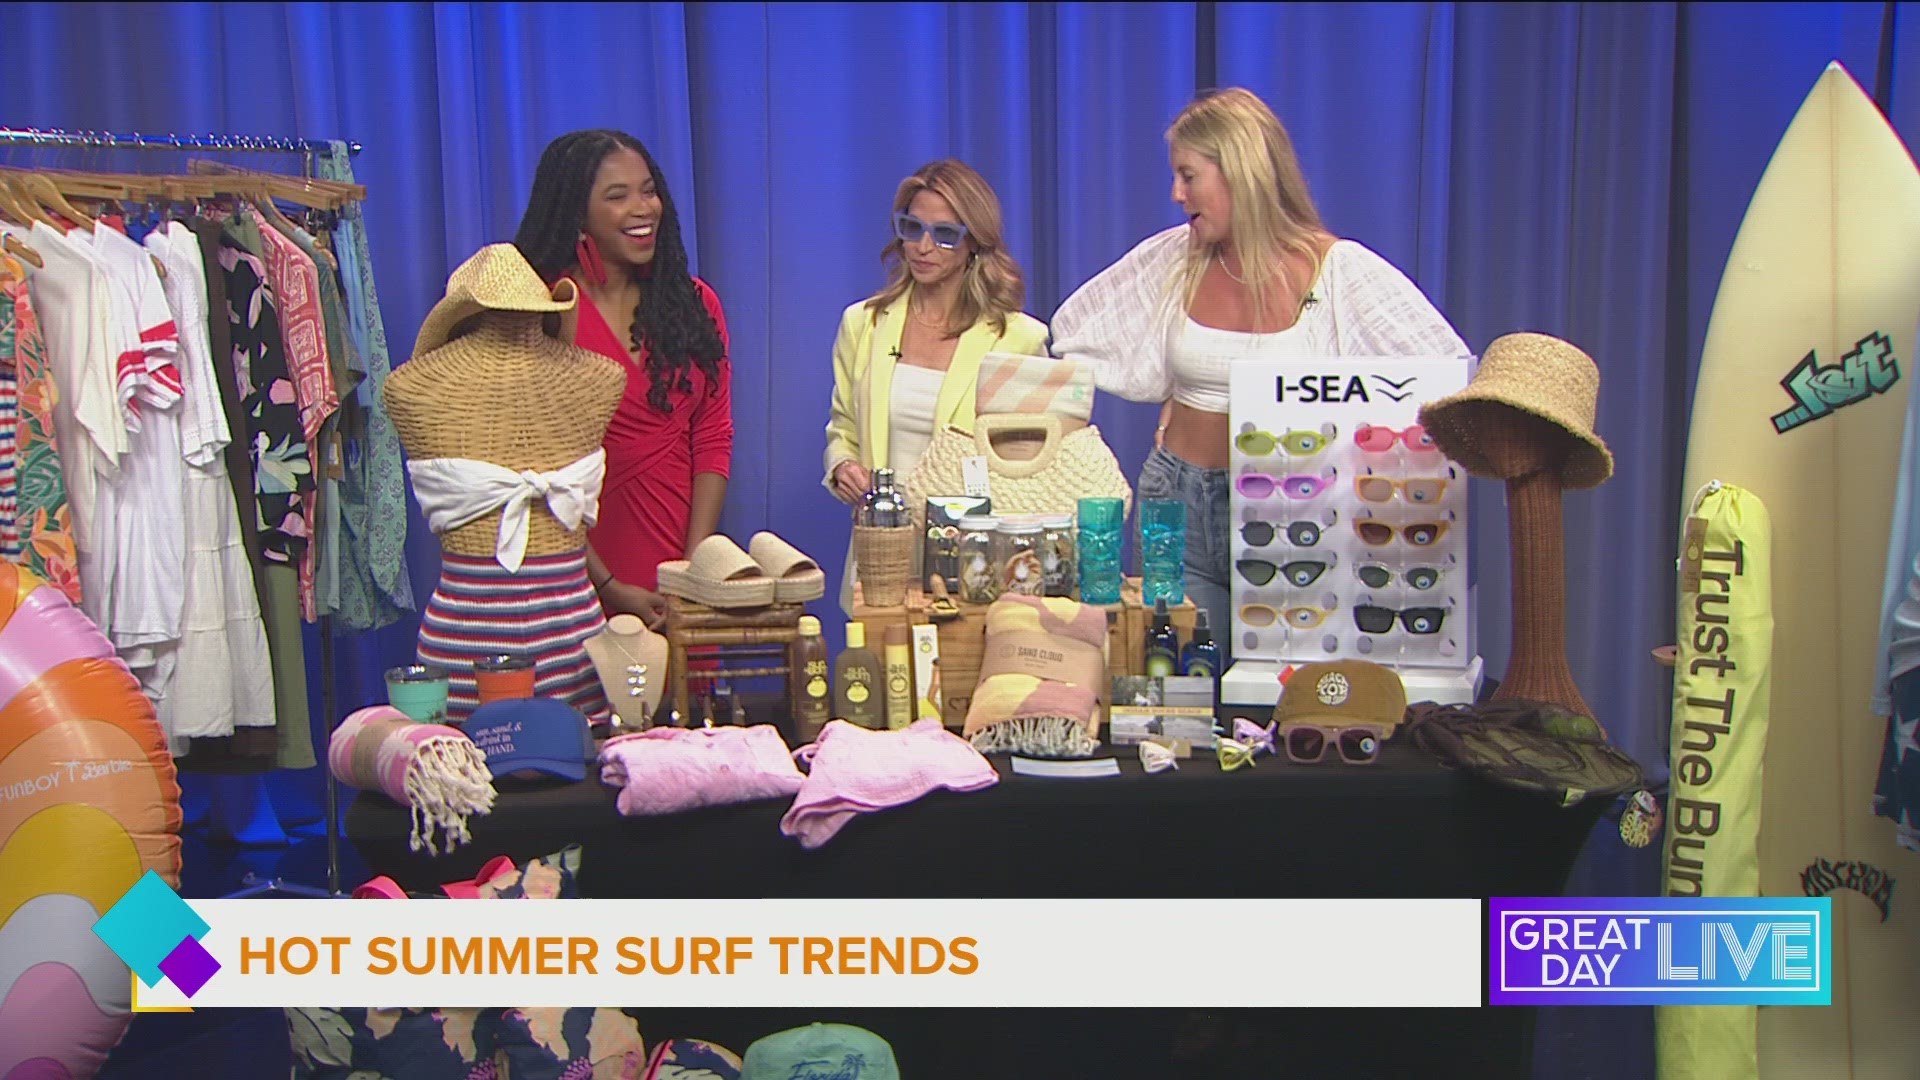 From cover-ups, to swimsuits to sunglasses, Brooke O’Hair with Blacktop Surf Shop shares what’s trending on the beach this summer.